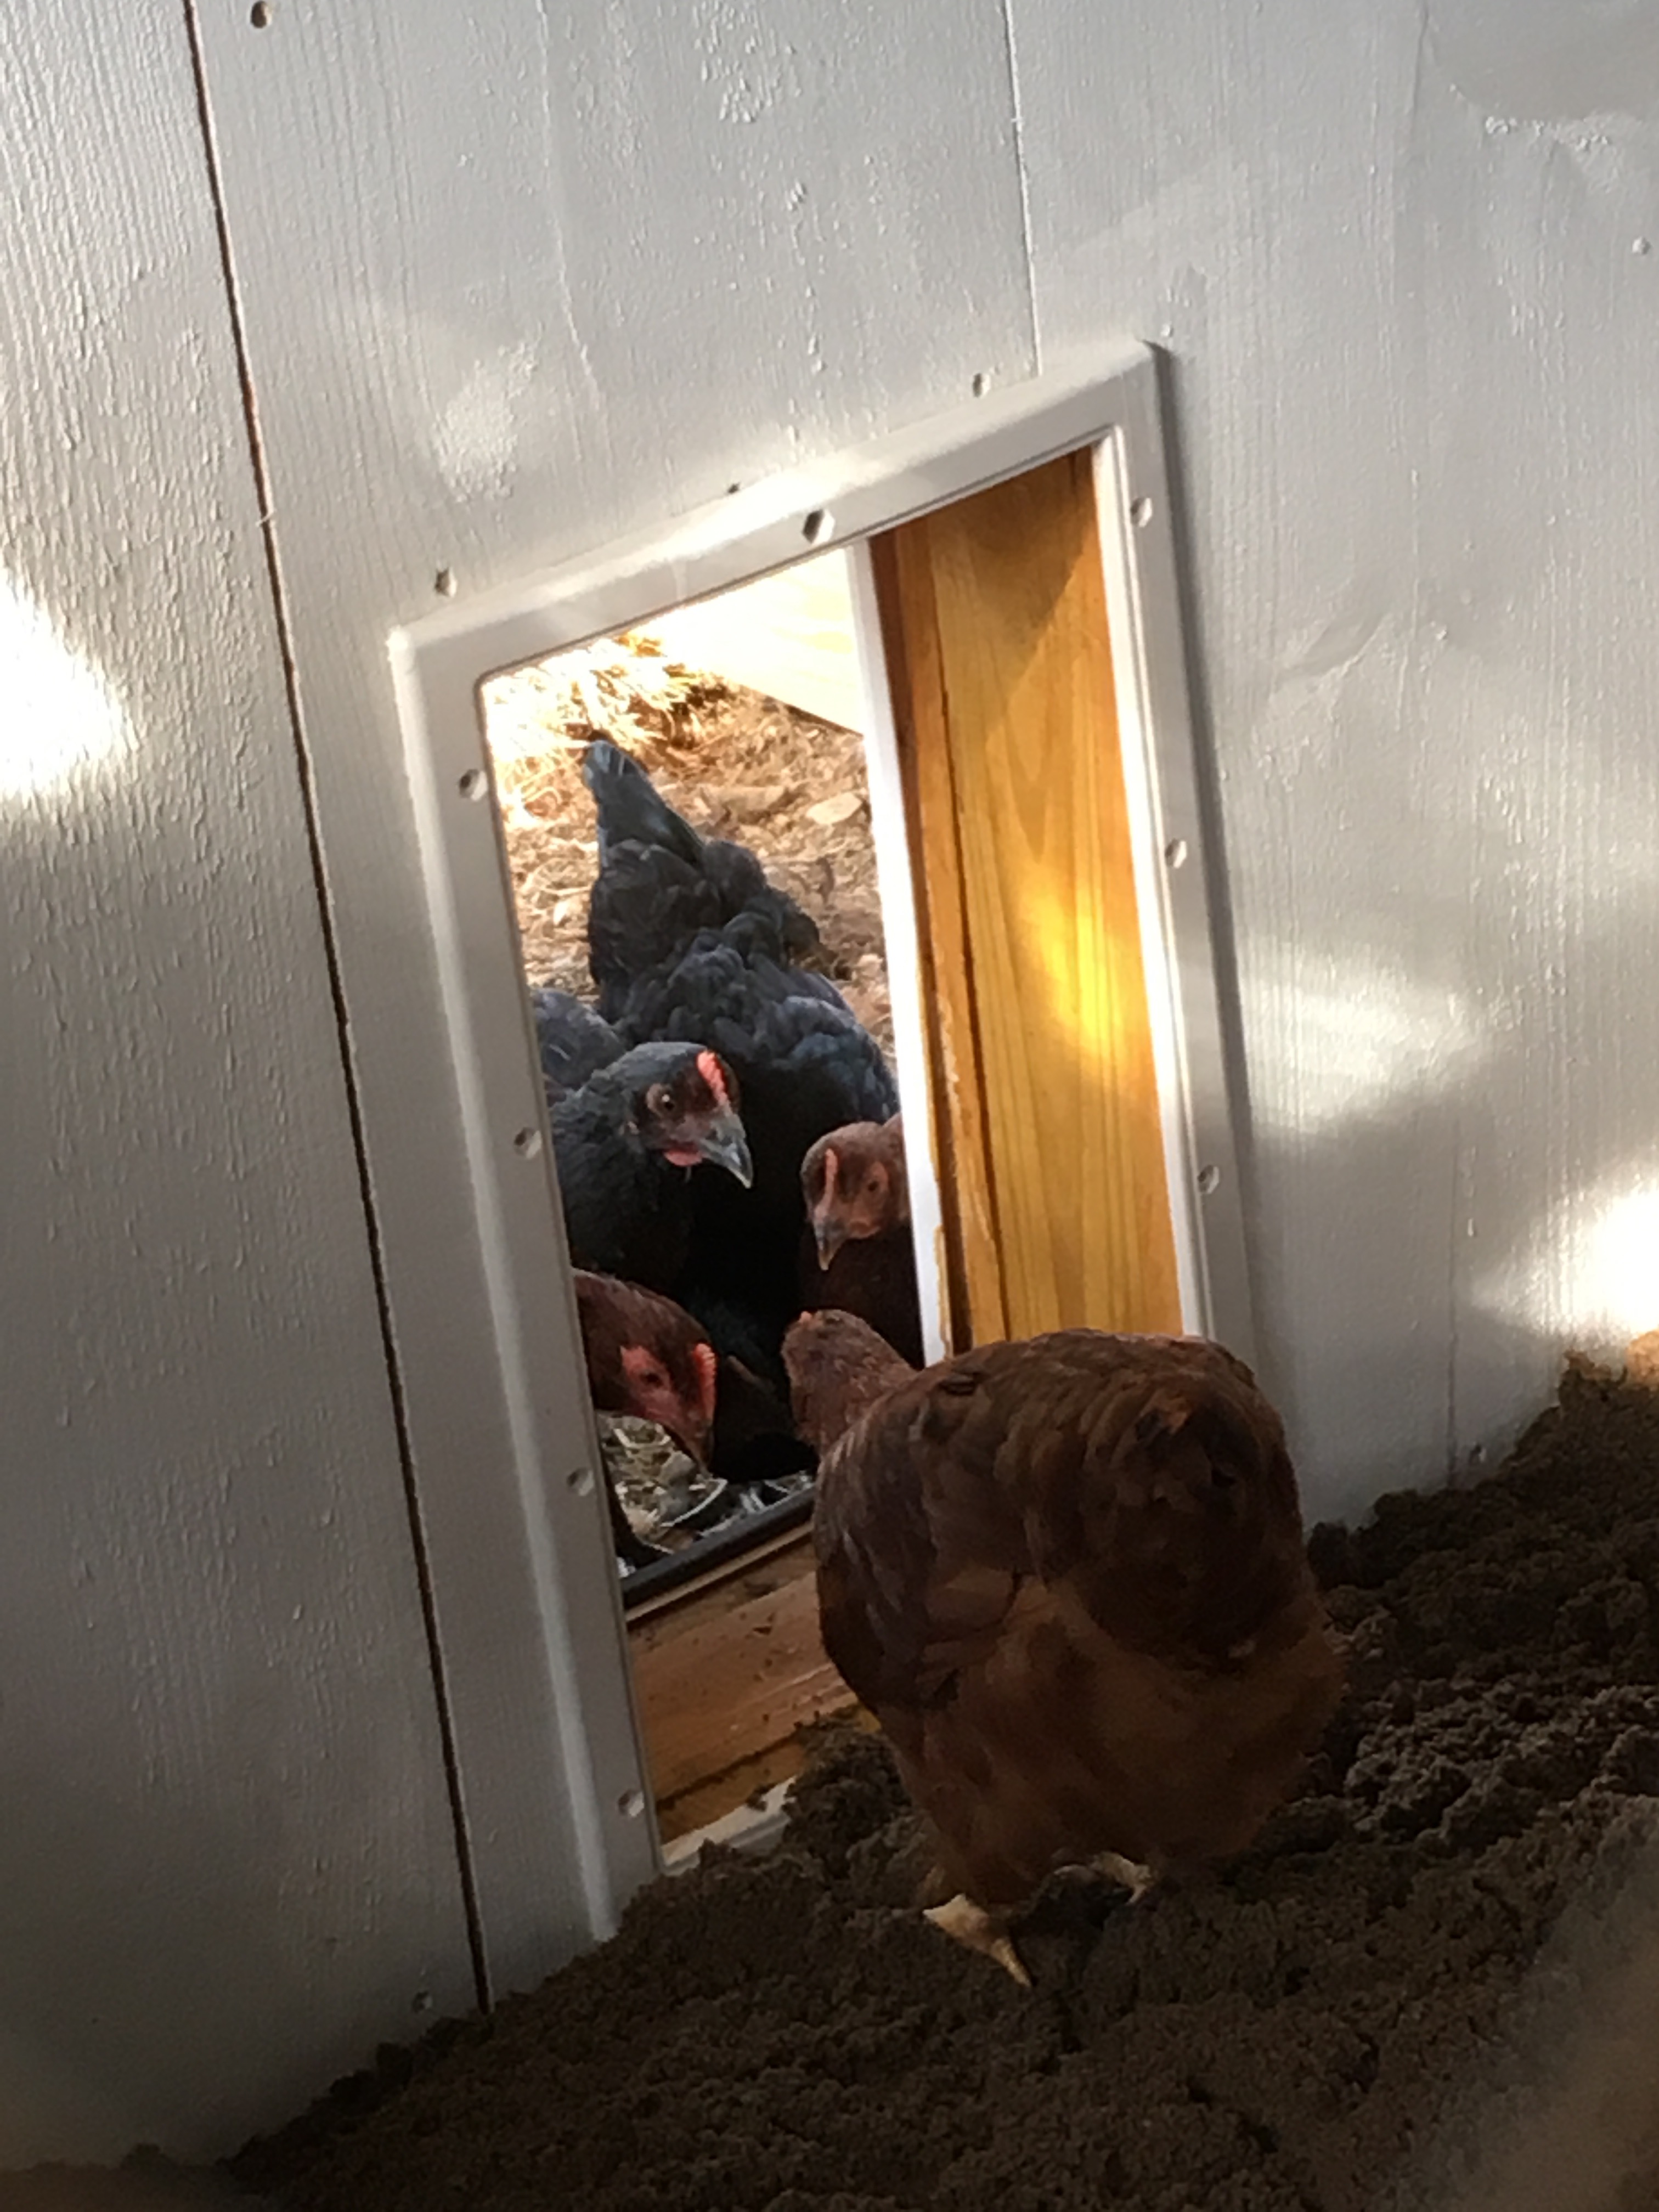 "Come on, it's great in here!" The first brave hen into the house.